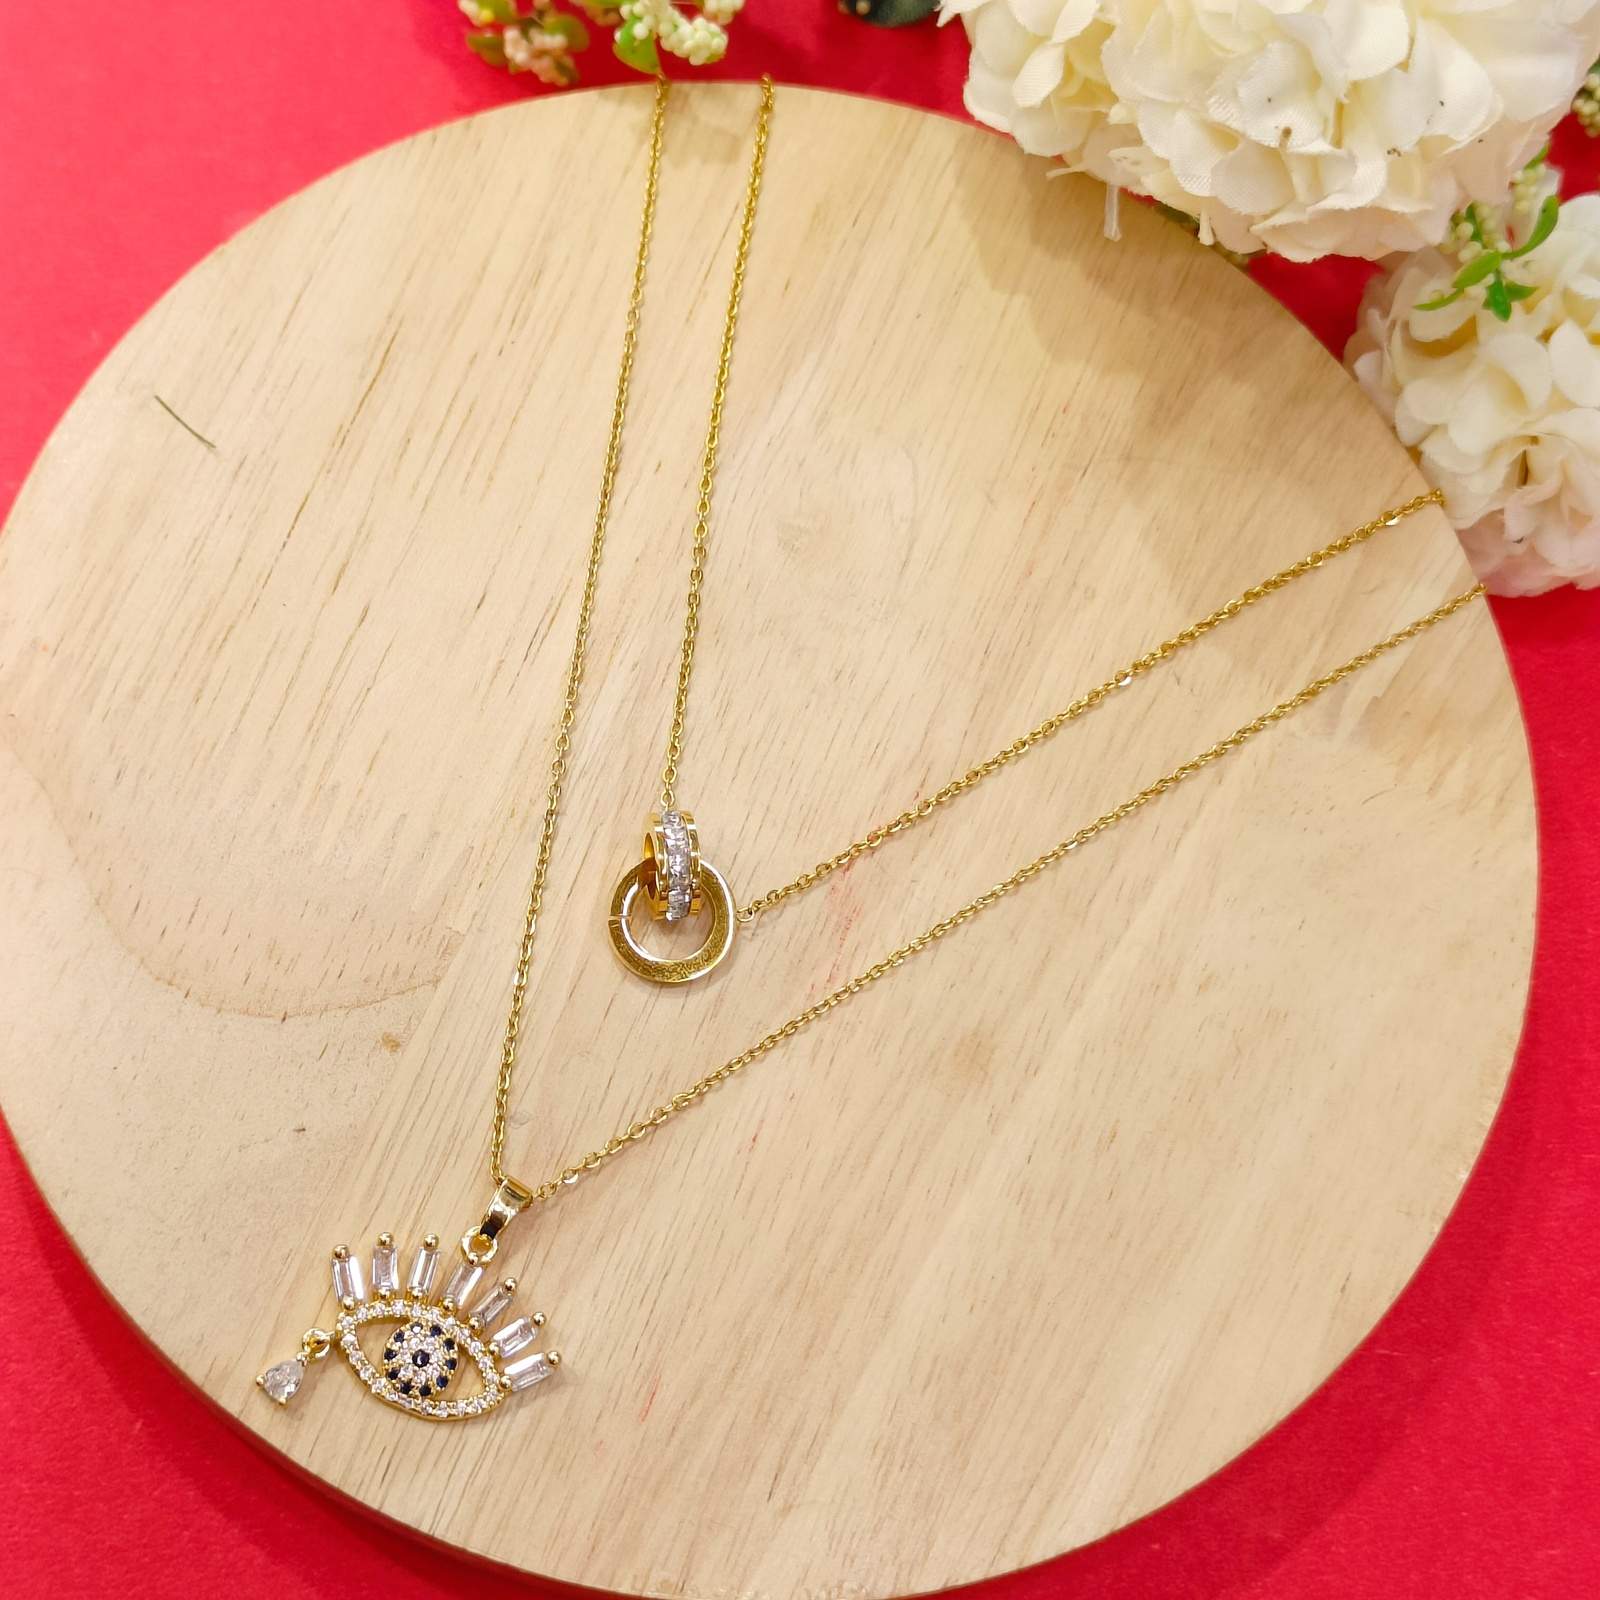 Layla Neckchain combo offer - Buy 1 Get 1 Free